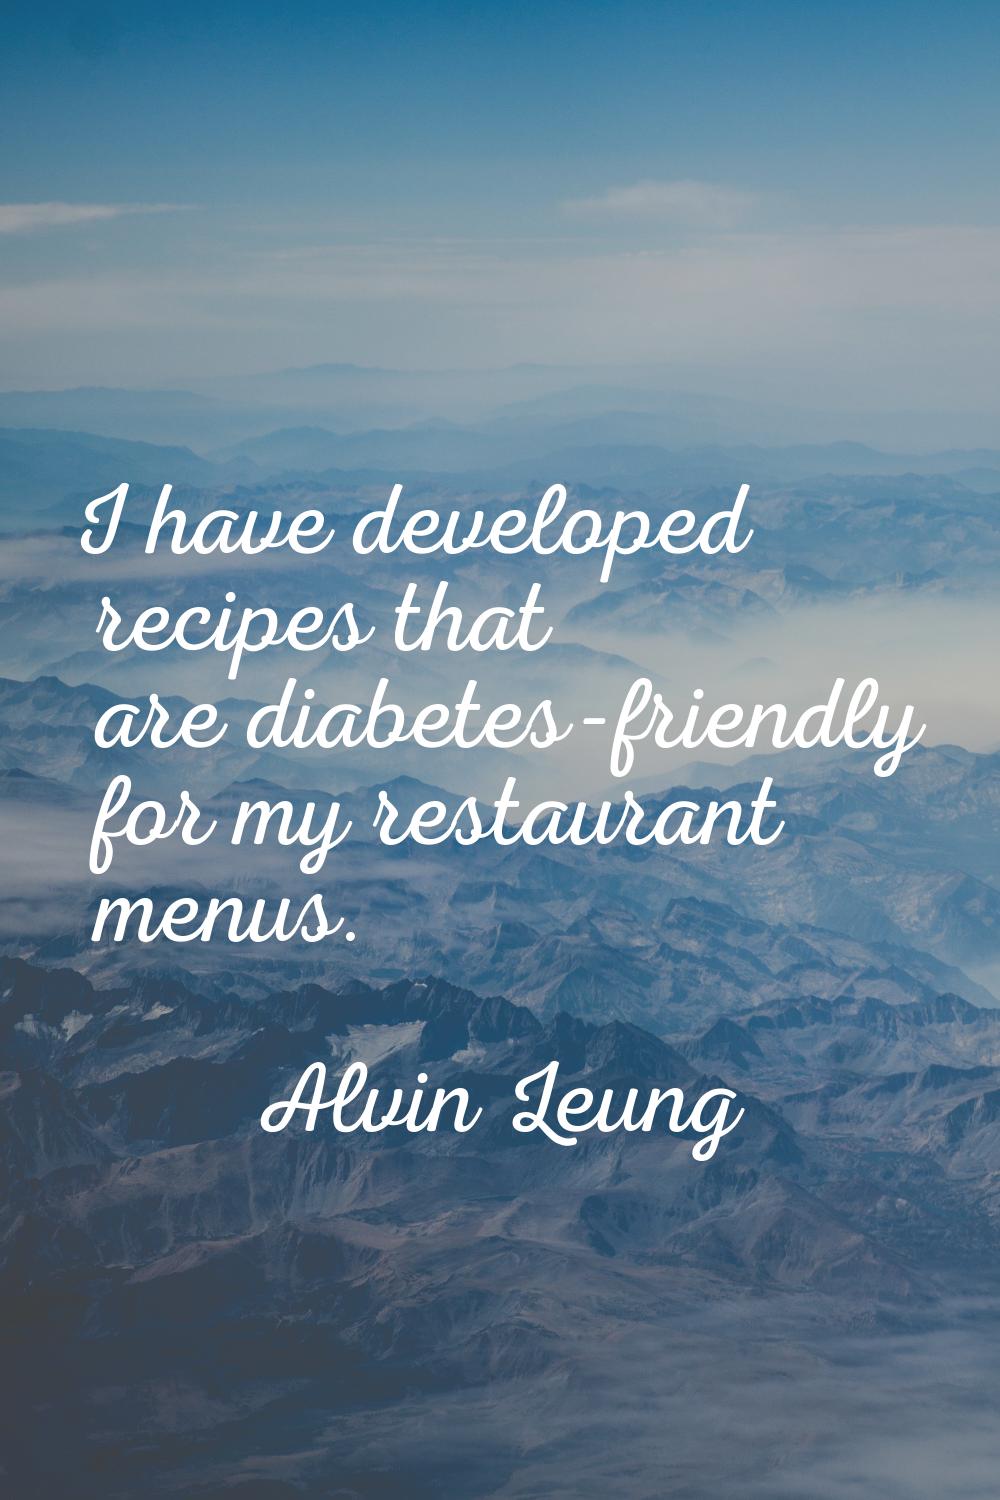 I have developed recipes that are diabetes-friendly for my restaurant menus.